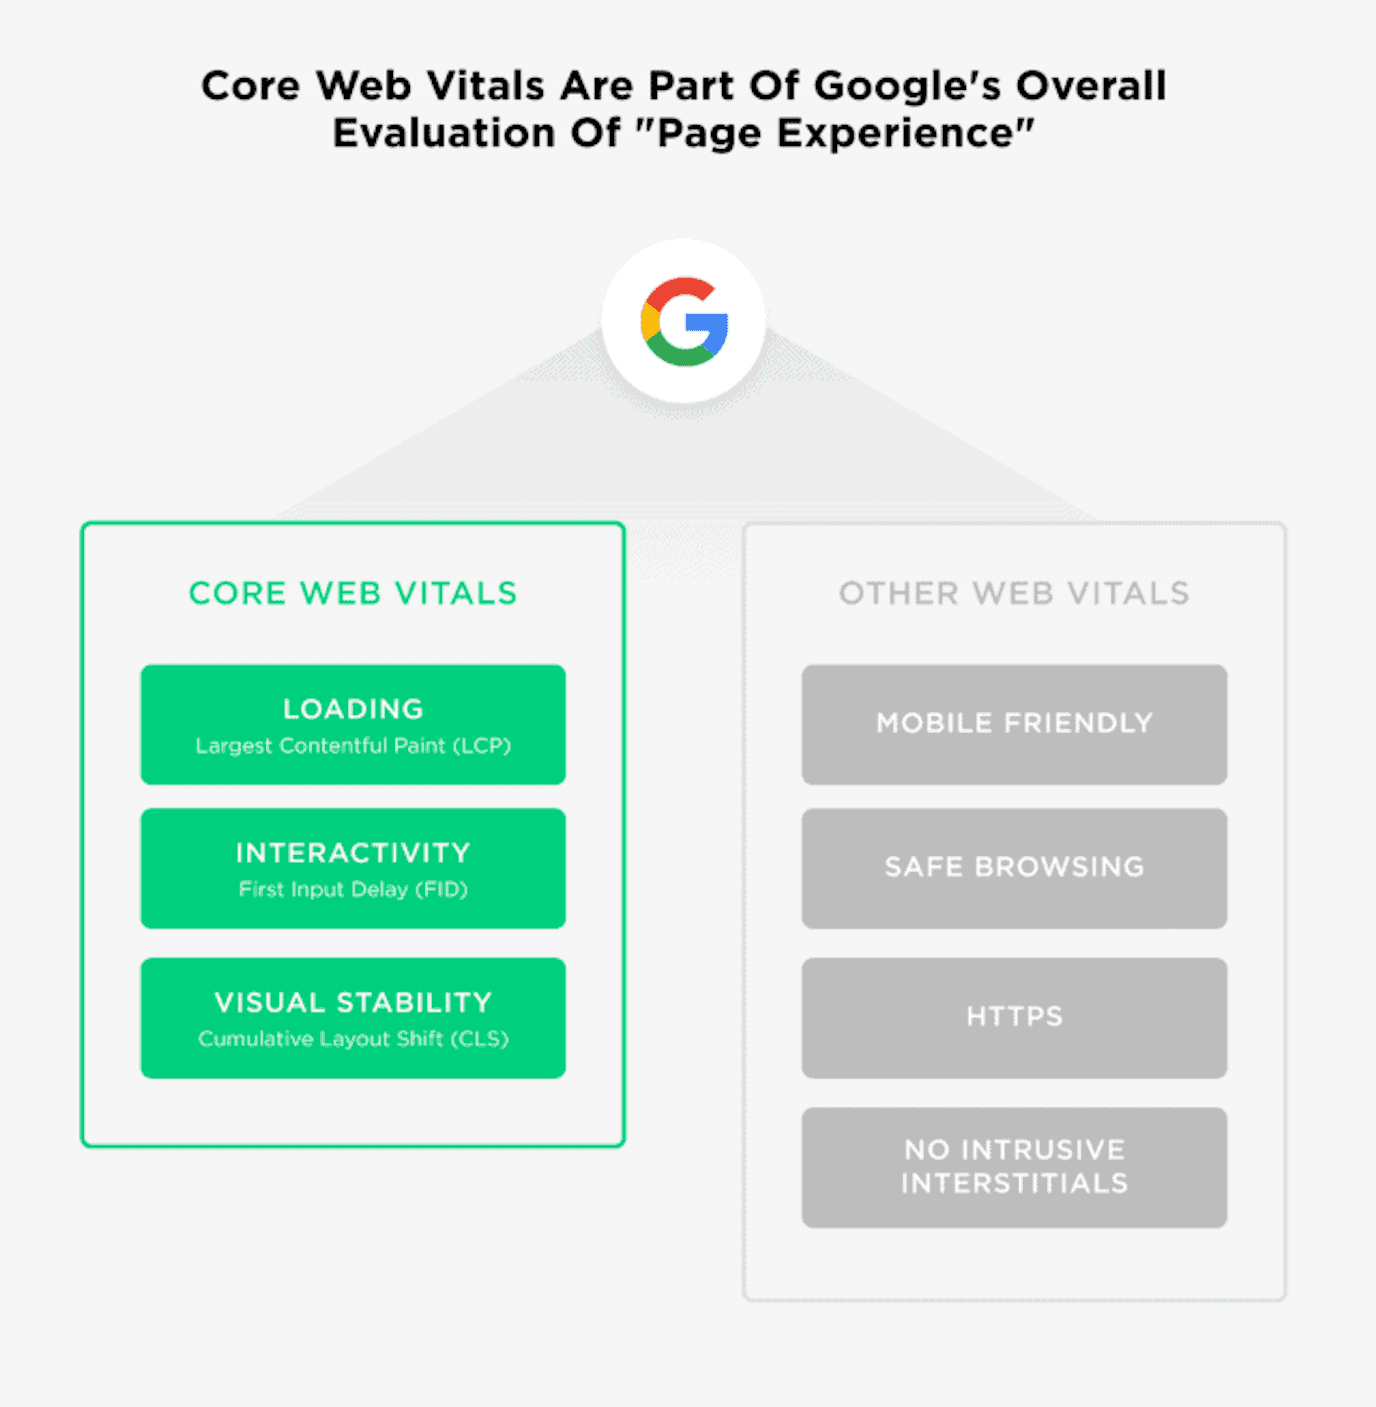 Core web vitals for Google's Page Experience